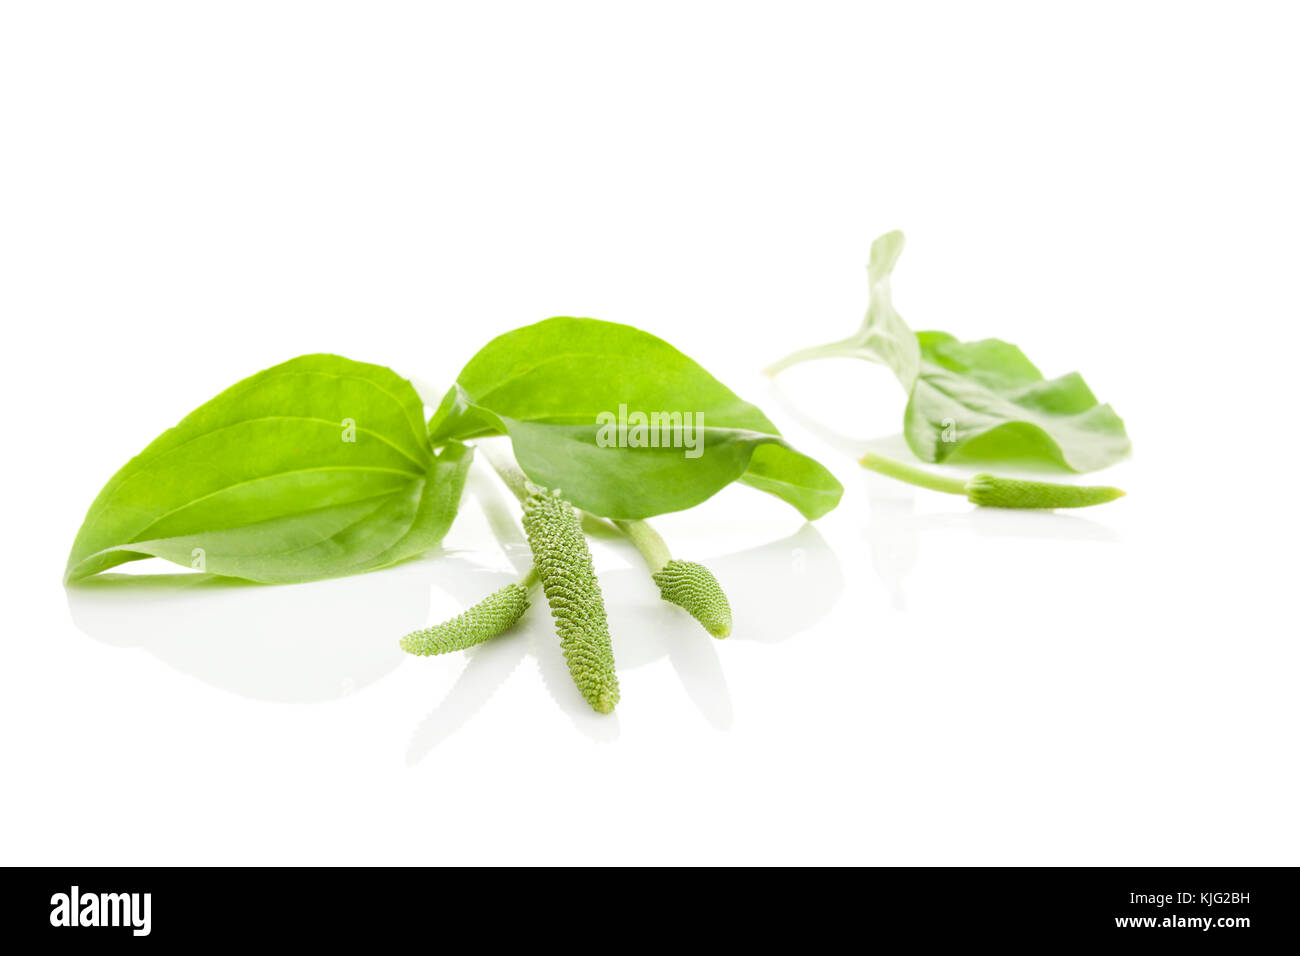 Plantago major (broadleaf plantain, white man's foot, or greater plantain isolated on white background. Healing herb. Stock Photo